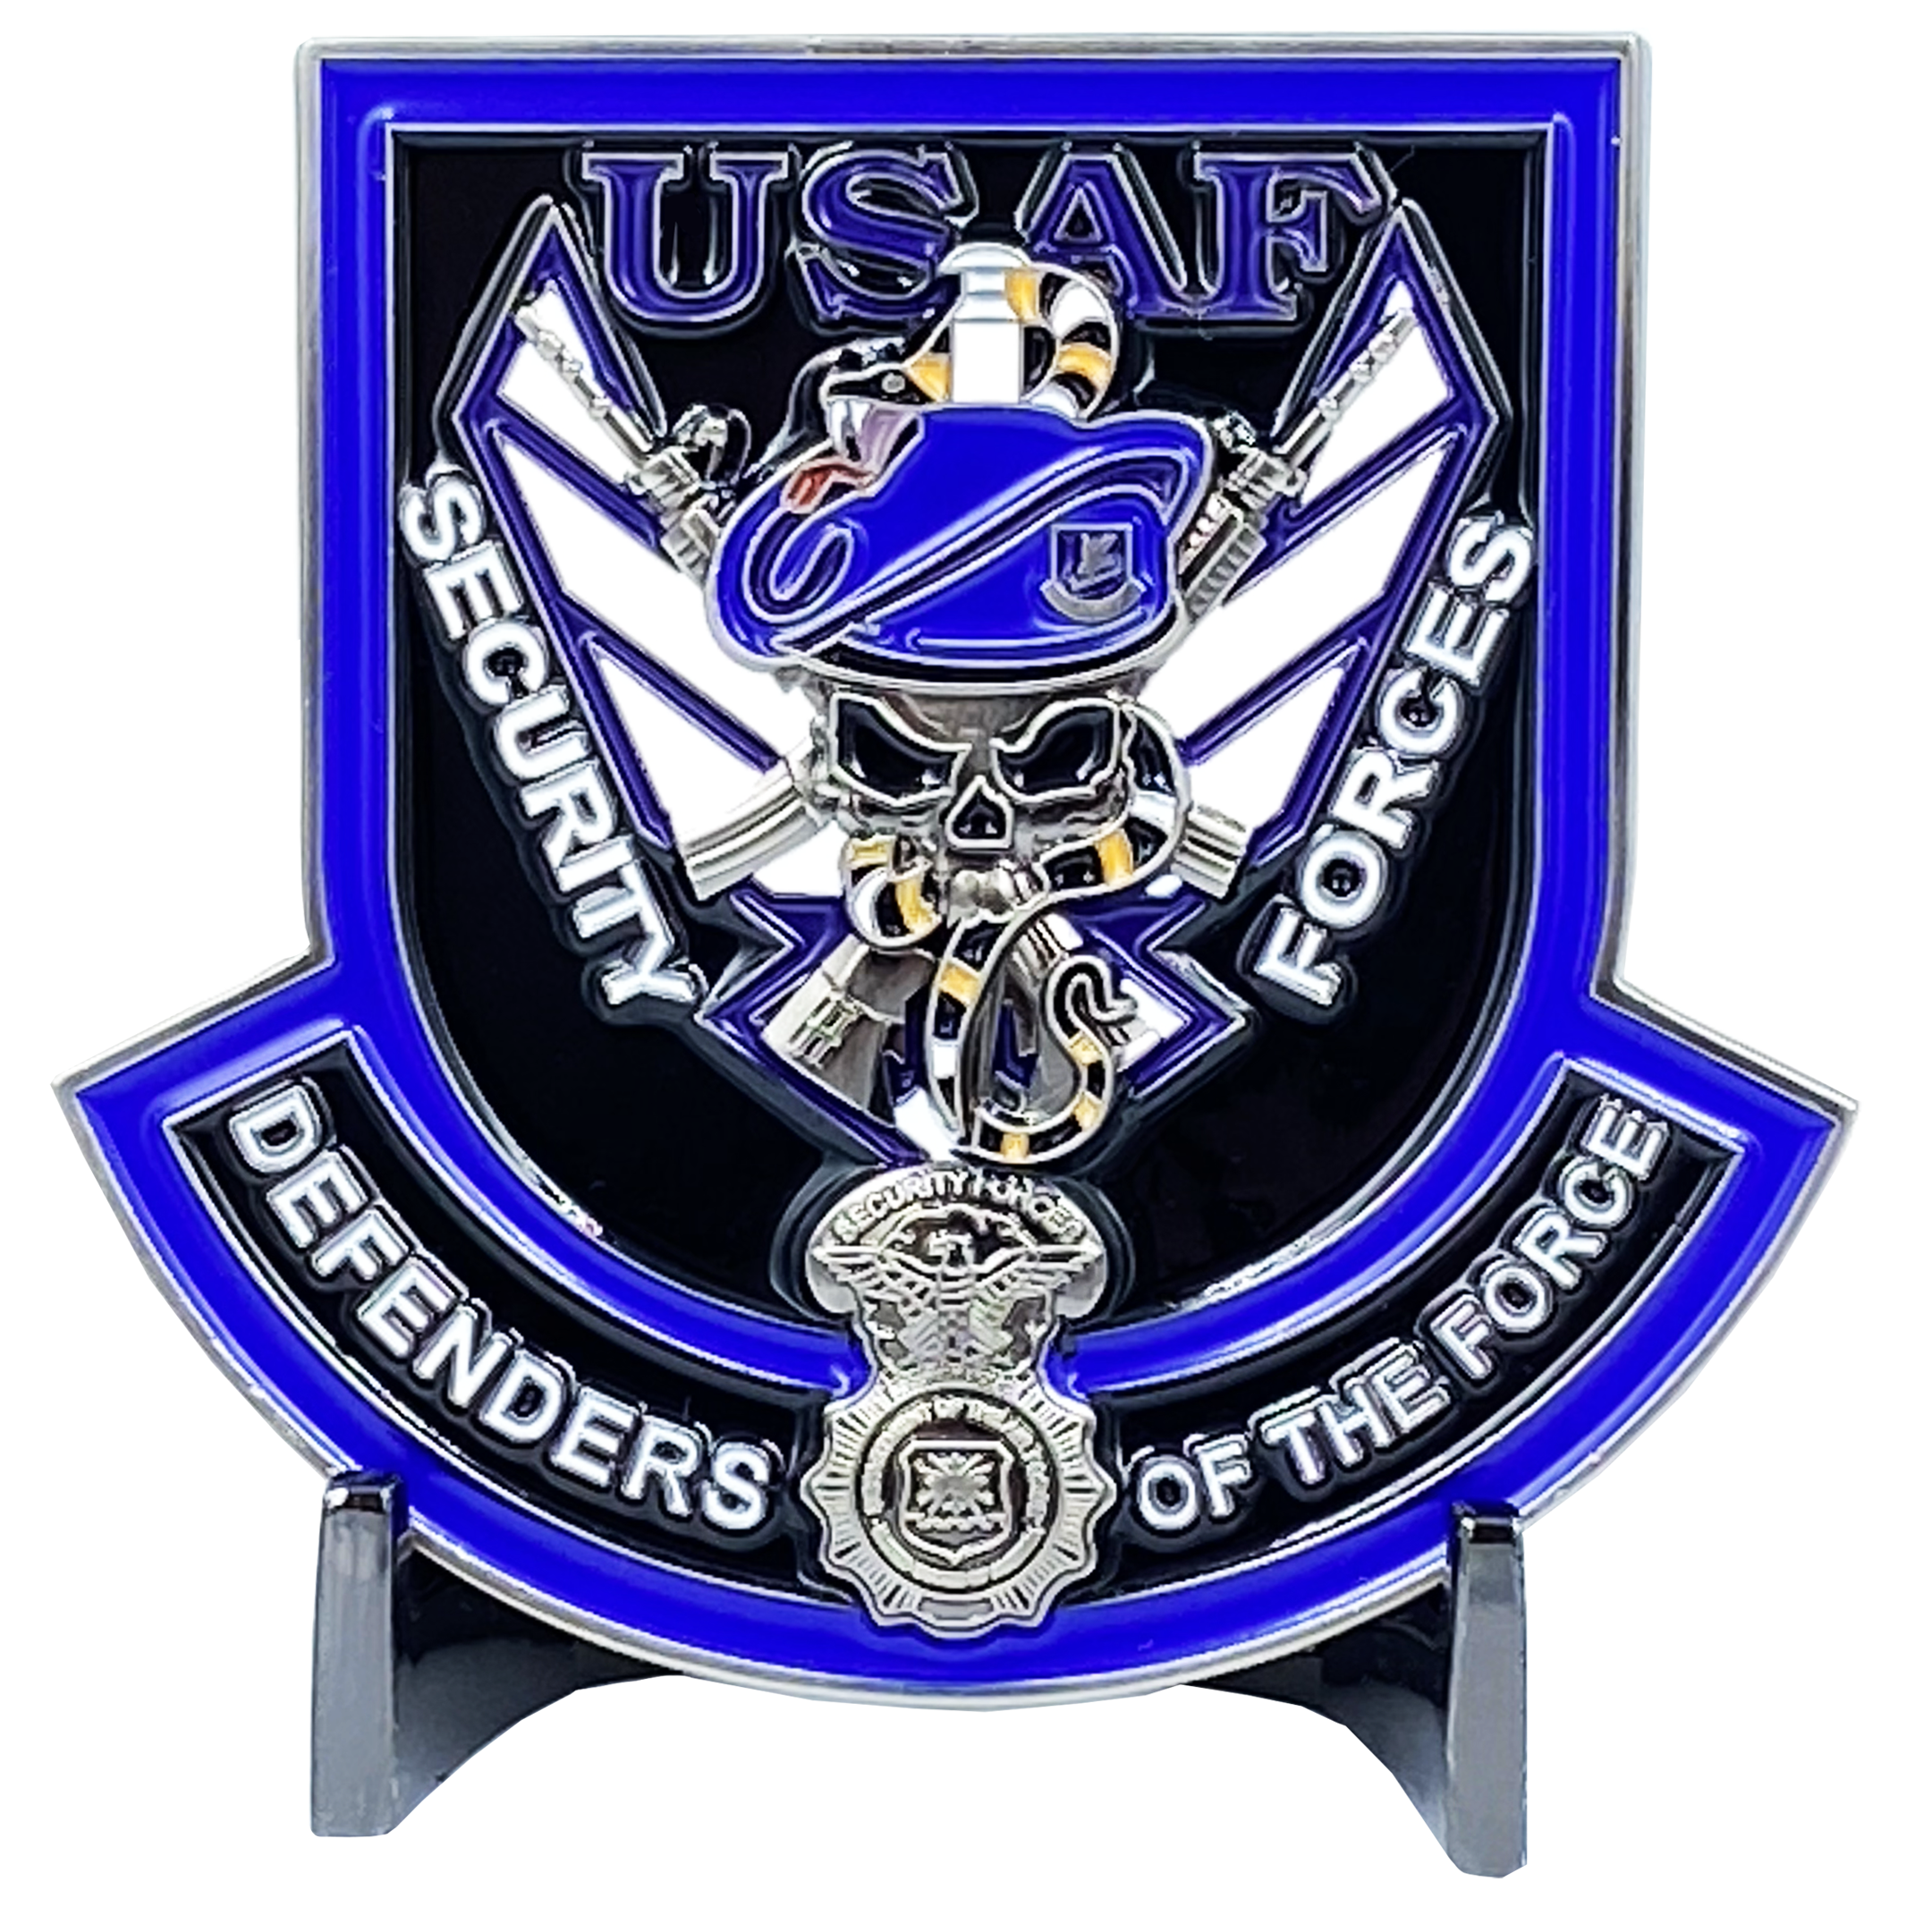 air force security forces police badge